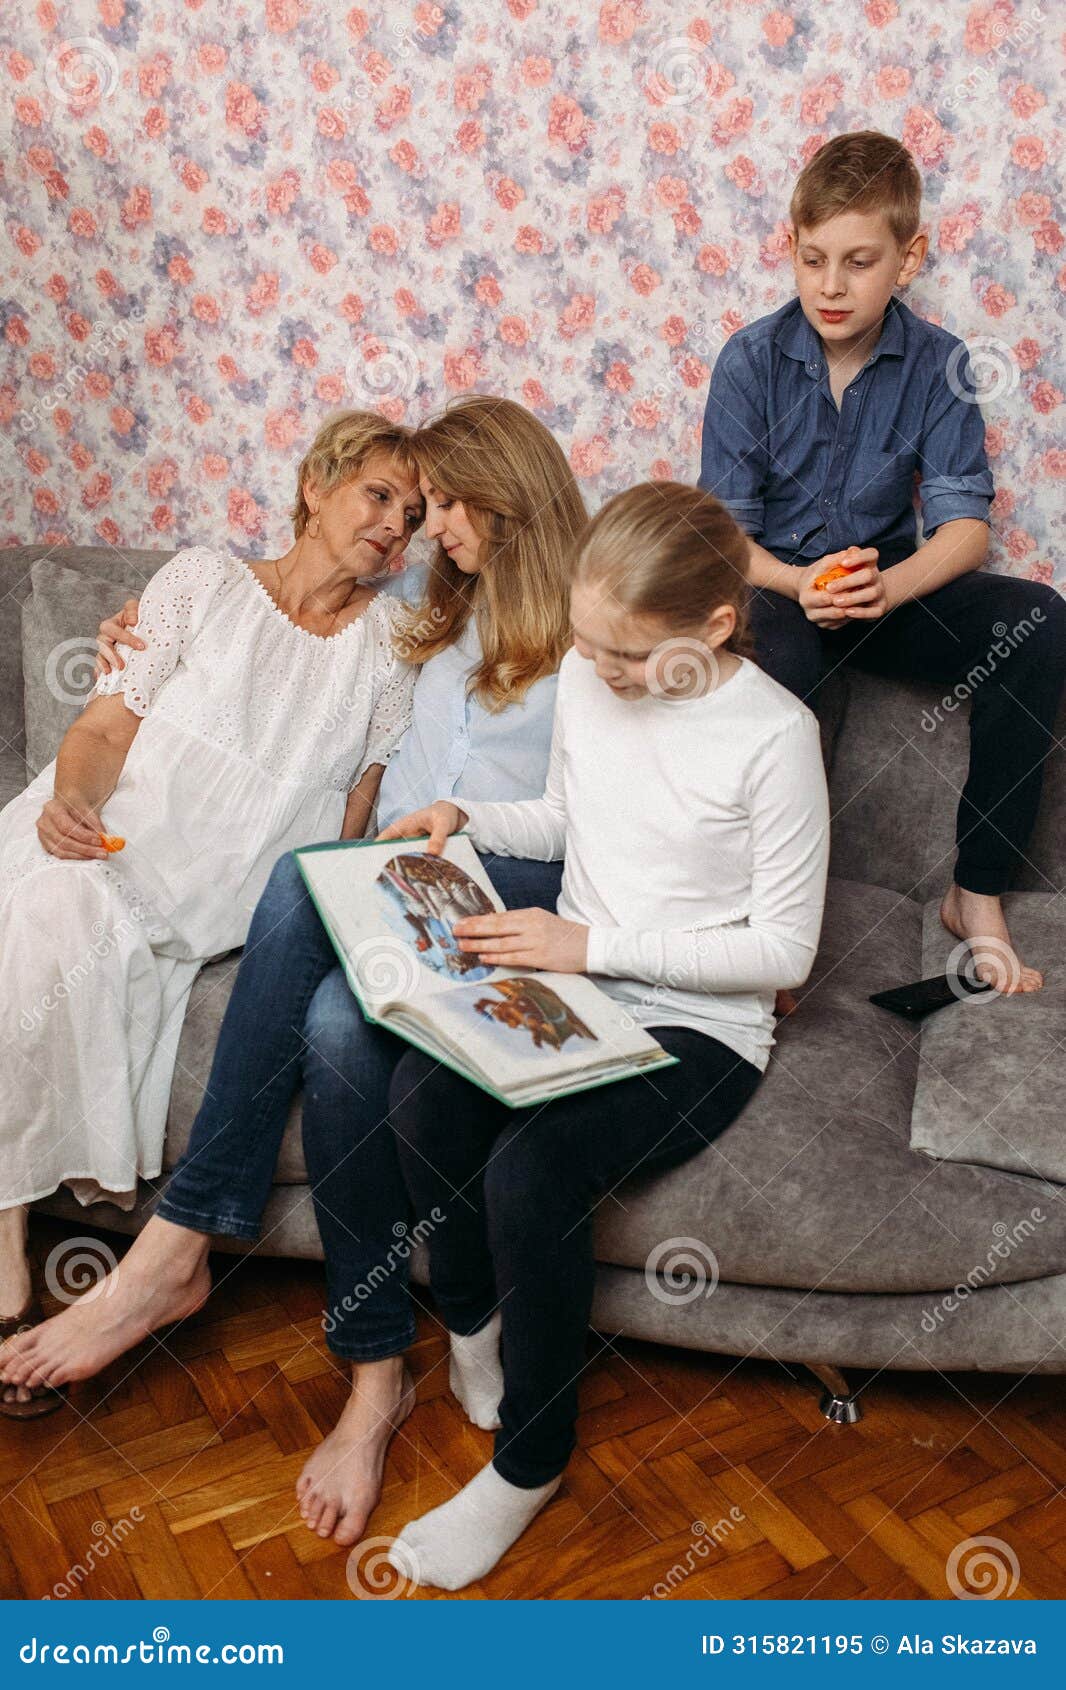 family engaged in storytime at home